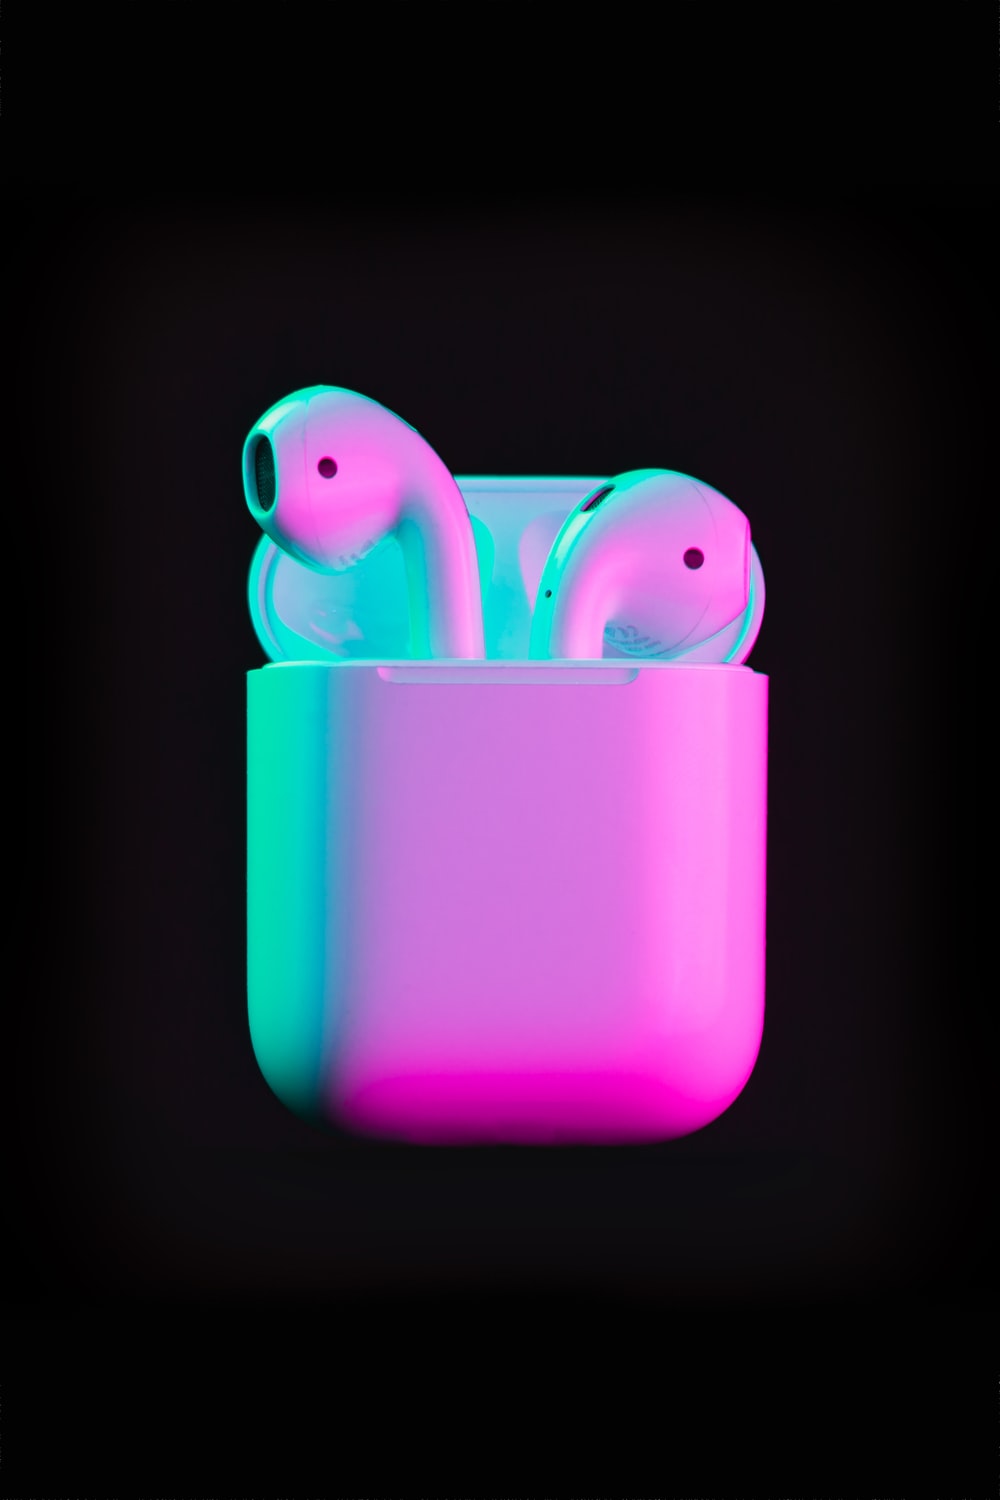 Airpod Wallpapers